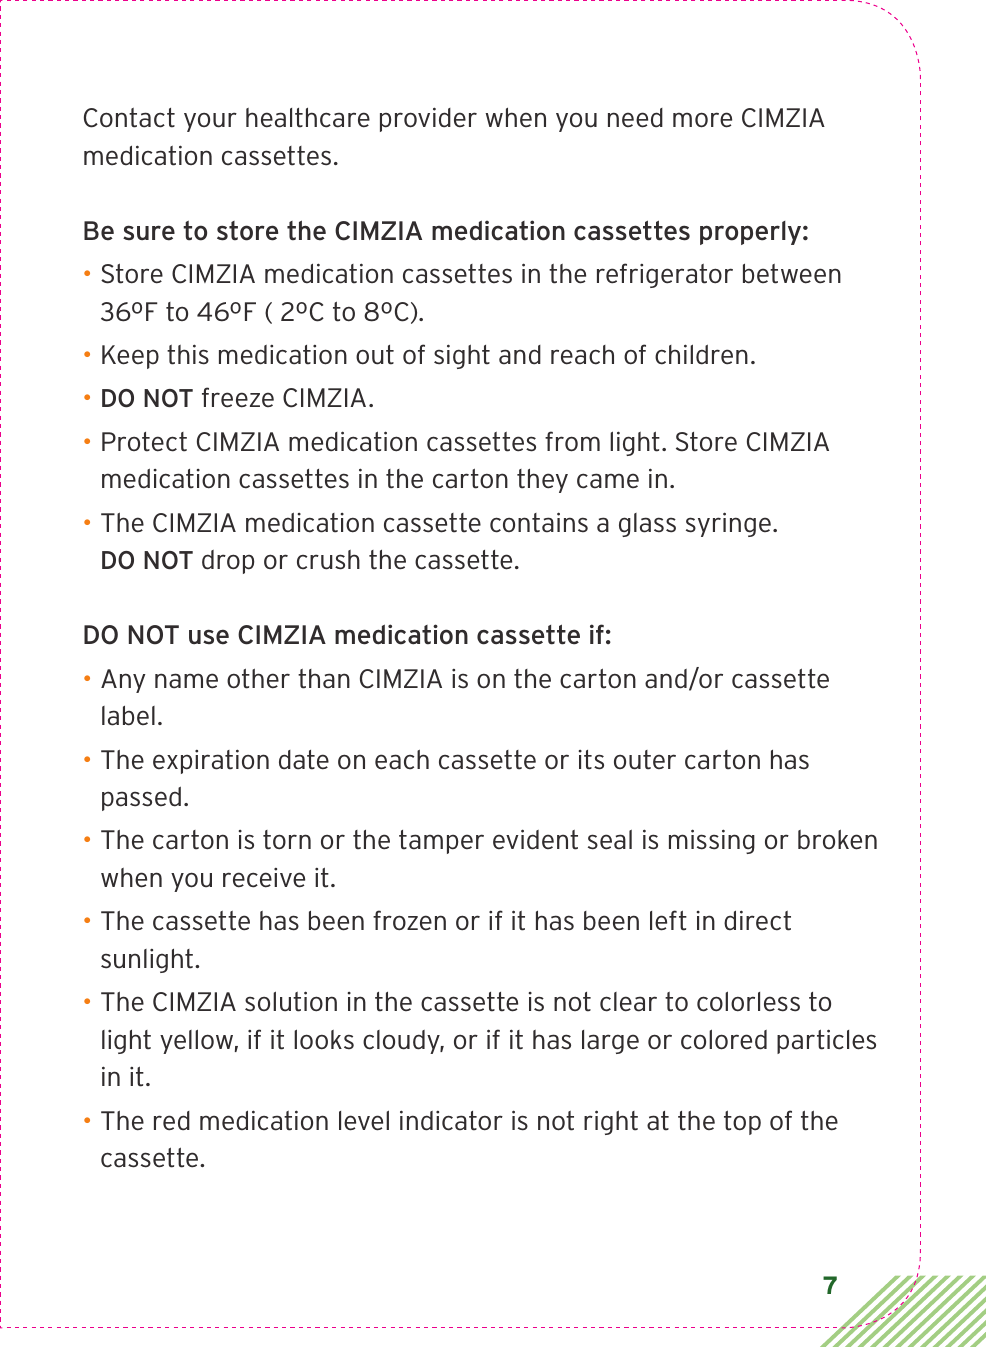 7Contact your healthcare provider when you need more CIMZIA medication cassettes.Be sure to store the CIMZIA medication cassettes properly: • Store CIMZIA medication cassettes in the refrigerator between 36ºF to 46ºF ( 2ºC to 8ºC). • Keep this medication out of sight and reach of children.• DO NOT freeze CIMZIA.• Protect CIMZIA medication cassettes from light. Store CIMZIA medication cassettes in the carton they came in.• The CIMZIA medication cassette contains a glass syringe.  DO NOT drop or crush the cassette.DO NOT use CIMZIA medication cassette if:• Any name other than CIMZIA is on the carton and/or cassette label.• The expiration date on each cassette or its outer carton has passed.• The carton is torn or the tamper evident seal is missing or broken when you receive it.• The cassette has been frozen or if it has been left in direct sunlight.• The CIMZIA solution in the cassette is not clear to colorless to light yellow, if it looks cloudy, or if it has large or colored particles in it.• The red medication level indicator is not right at the top of the cassette.